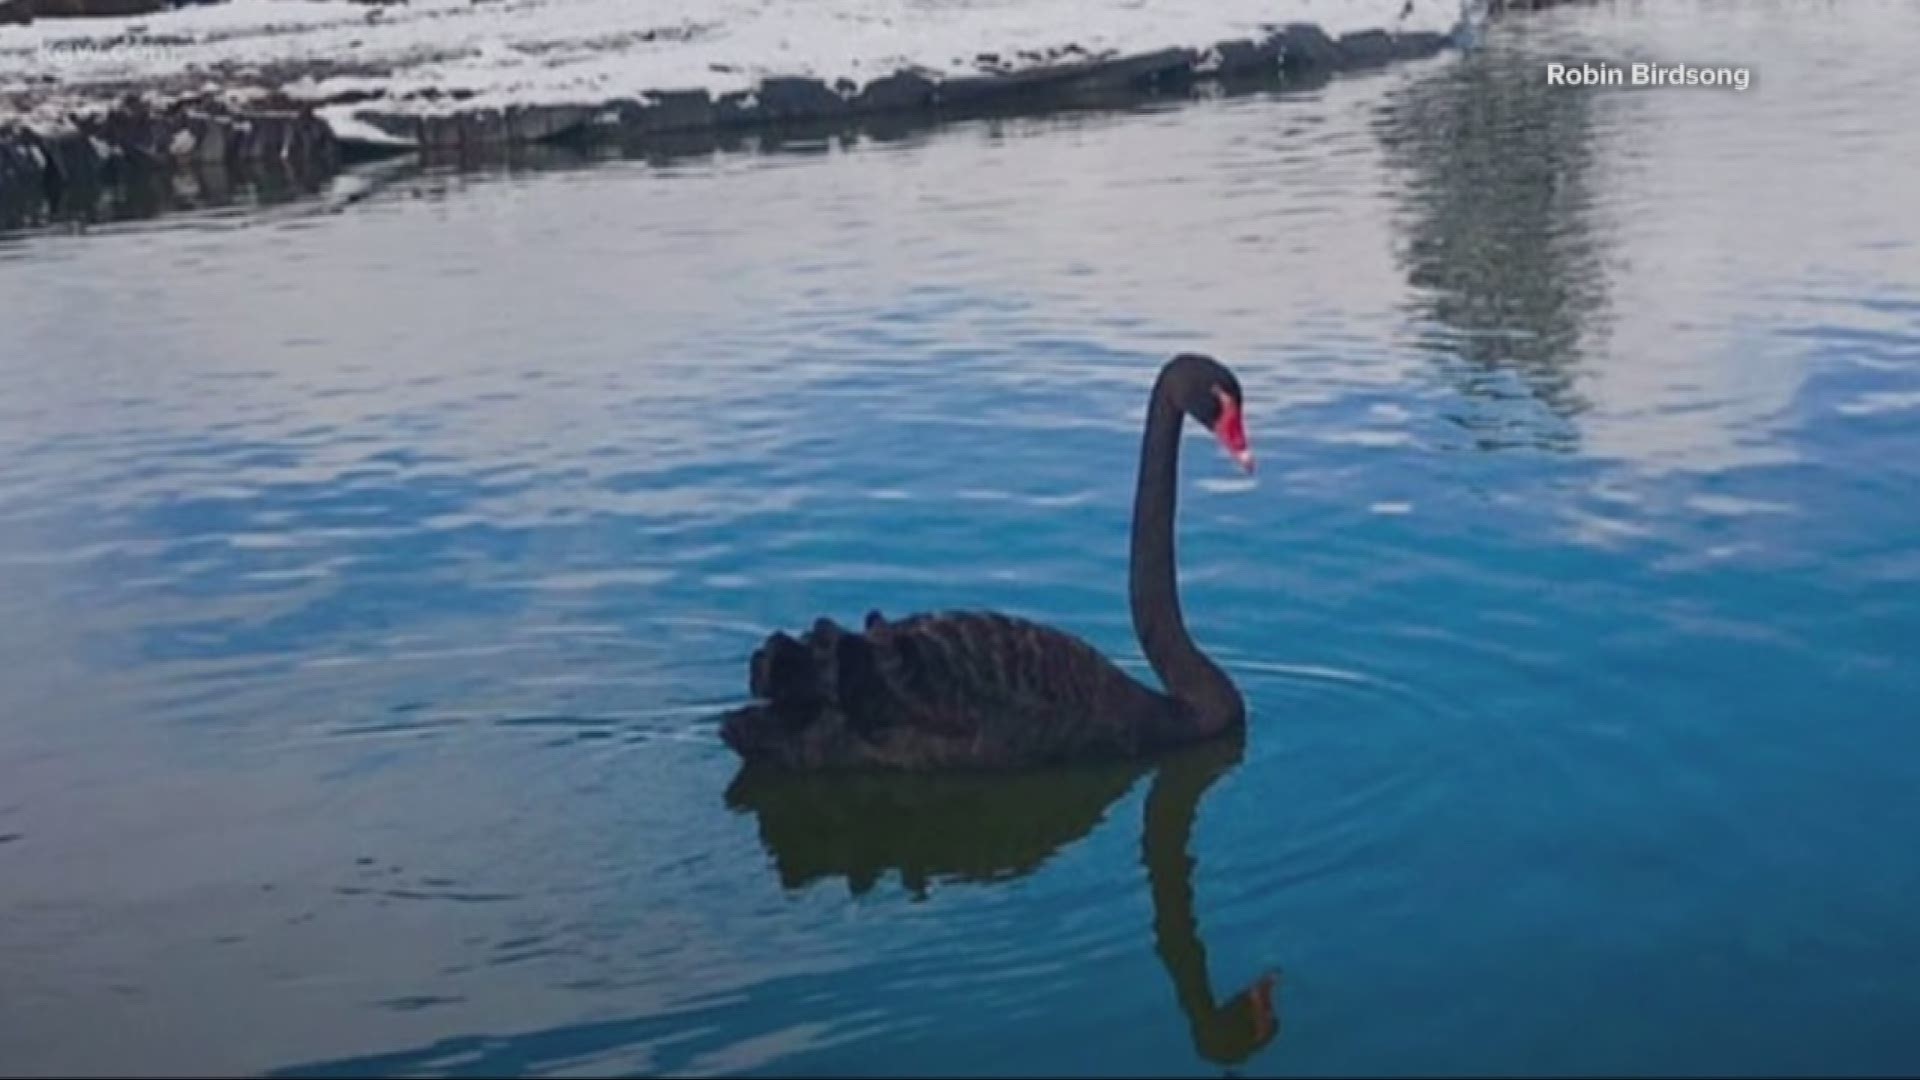 Someone stole a black swan in the middle of the night from a Newberg woman’s animal sanctuary.